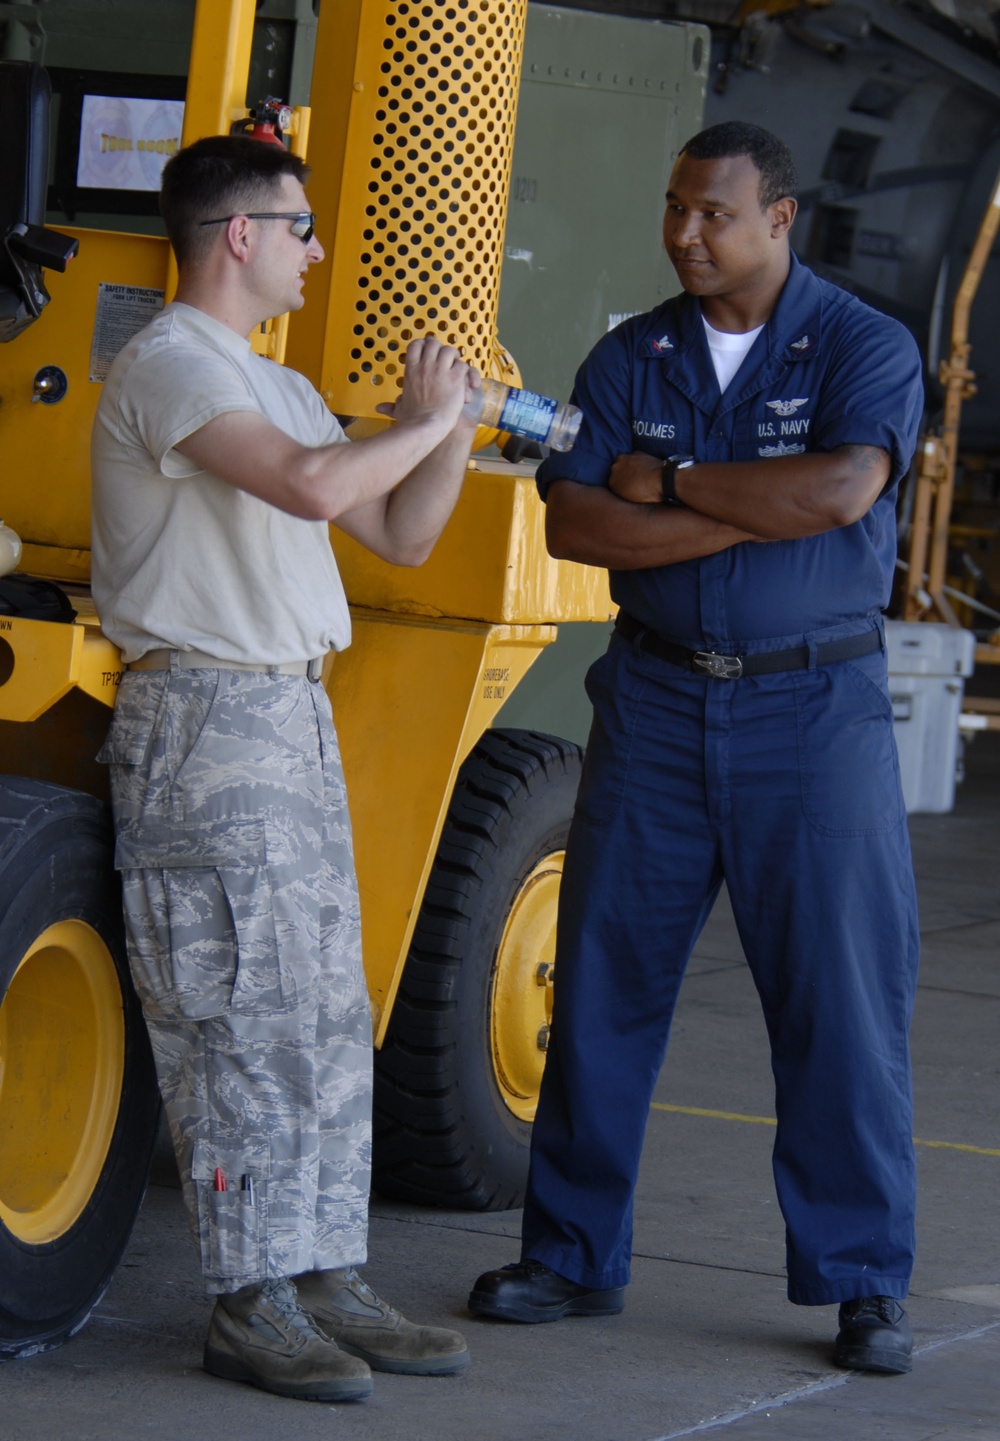 Air Force, Navy Combine for Air Combat Skills Training